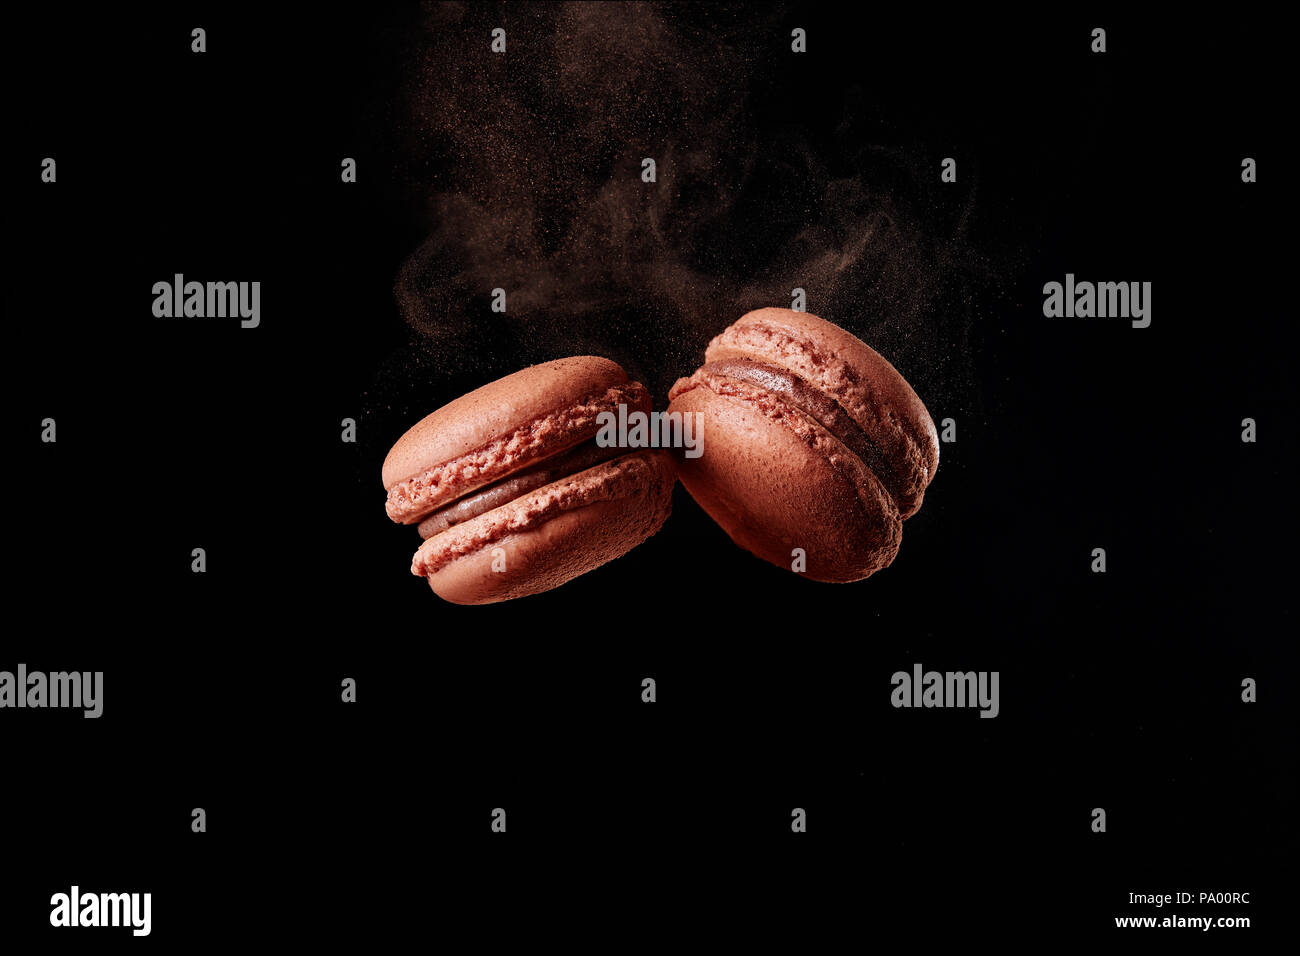 French chocolate macaron with cocoa powder against black background Stock Photo